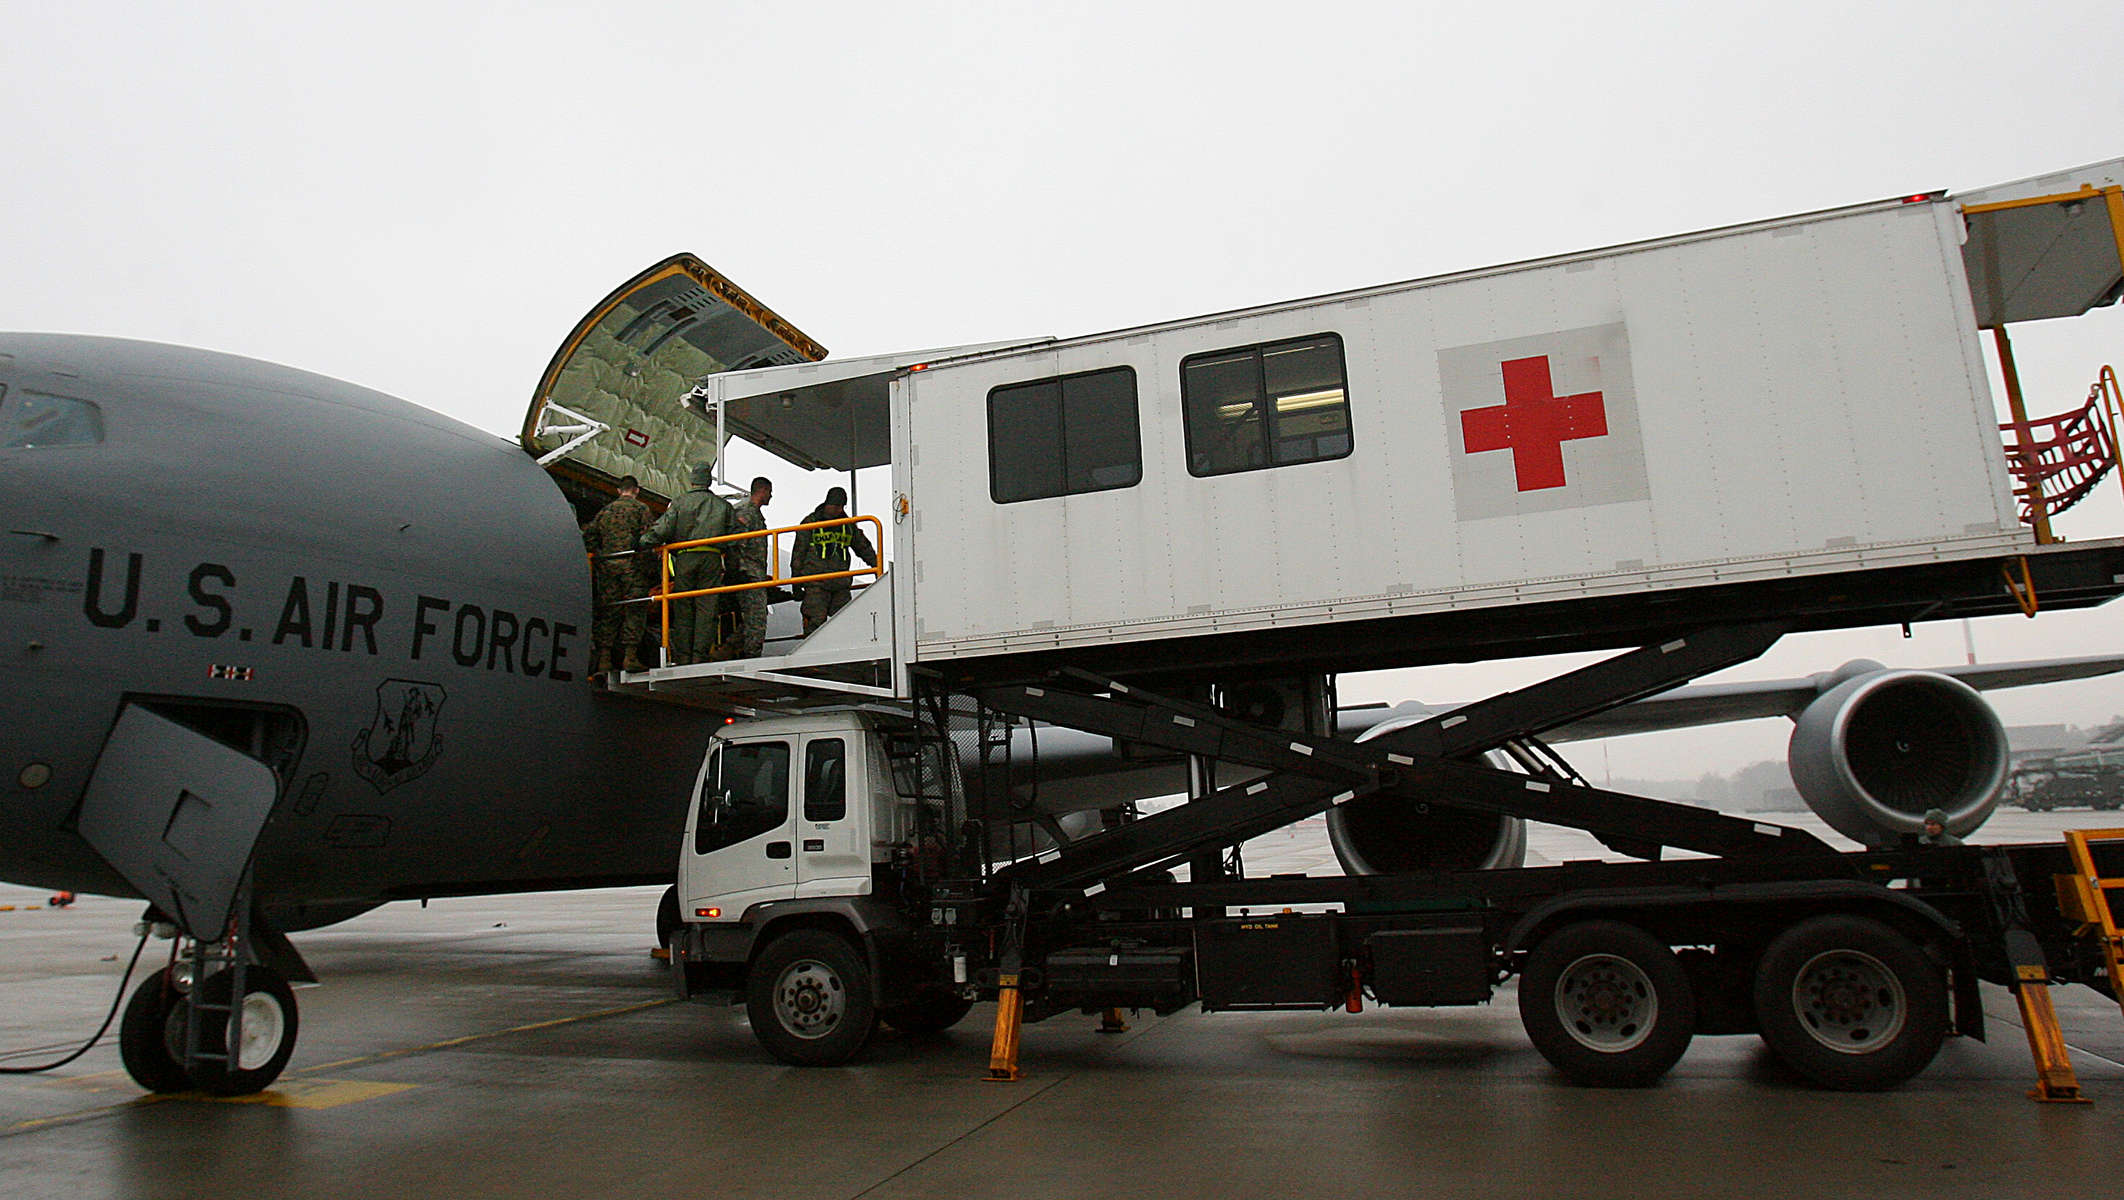 A Ramstein Air Force Base air evacuationmedical team unload wounded warriors from a KC-135 using a high deck patient loading platform. (The Press-Enterprise/ Mark Zaleski)